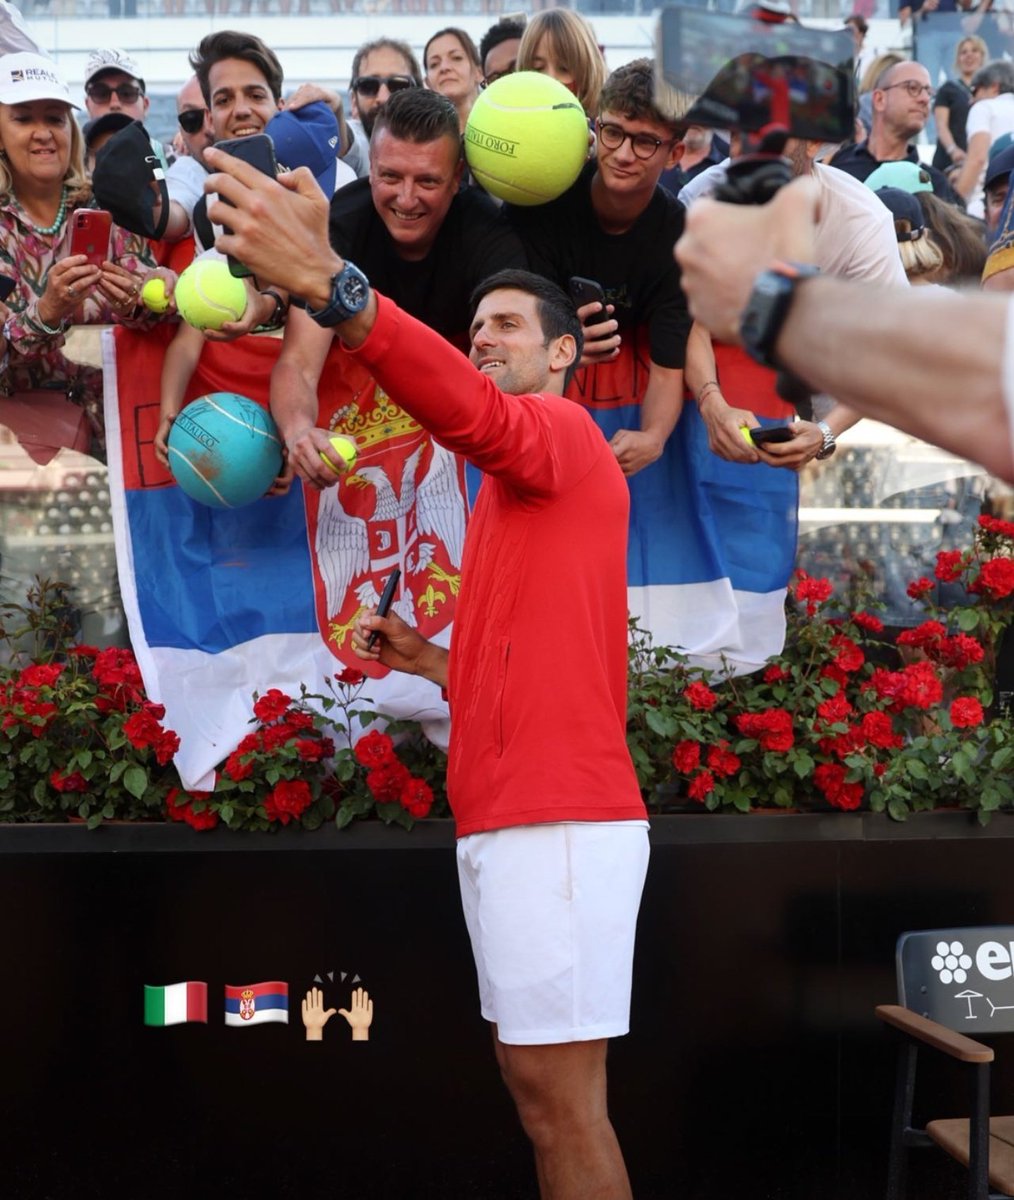 Djokovic celebrating with his fans after winning his 6th Rome Title & record breaking 38th Masters 1000 Title!!

The support for Djokovic in Rome has been absolutely incredible!!

No player gives back to his fans more than Djokovic!!

Uno Di Noi🙏🏽❤🇮🇹 

#idemo #NoleFam #IBI22